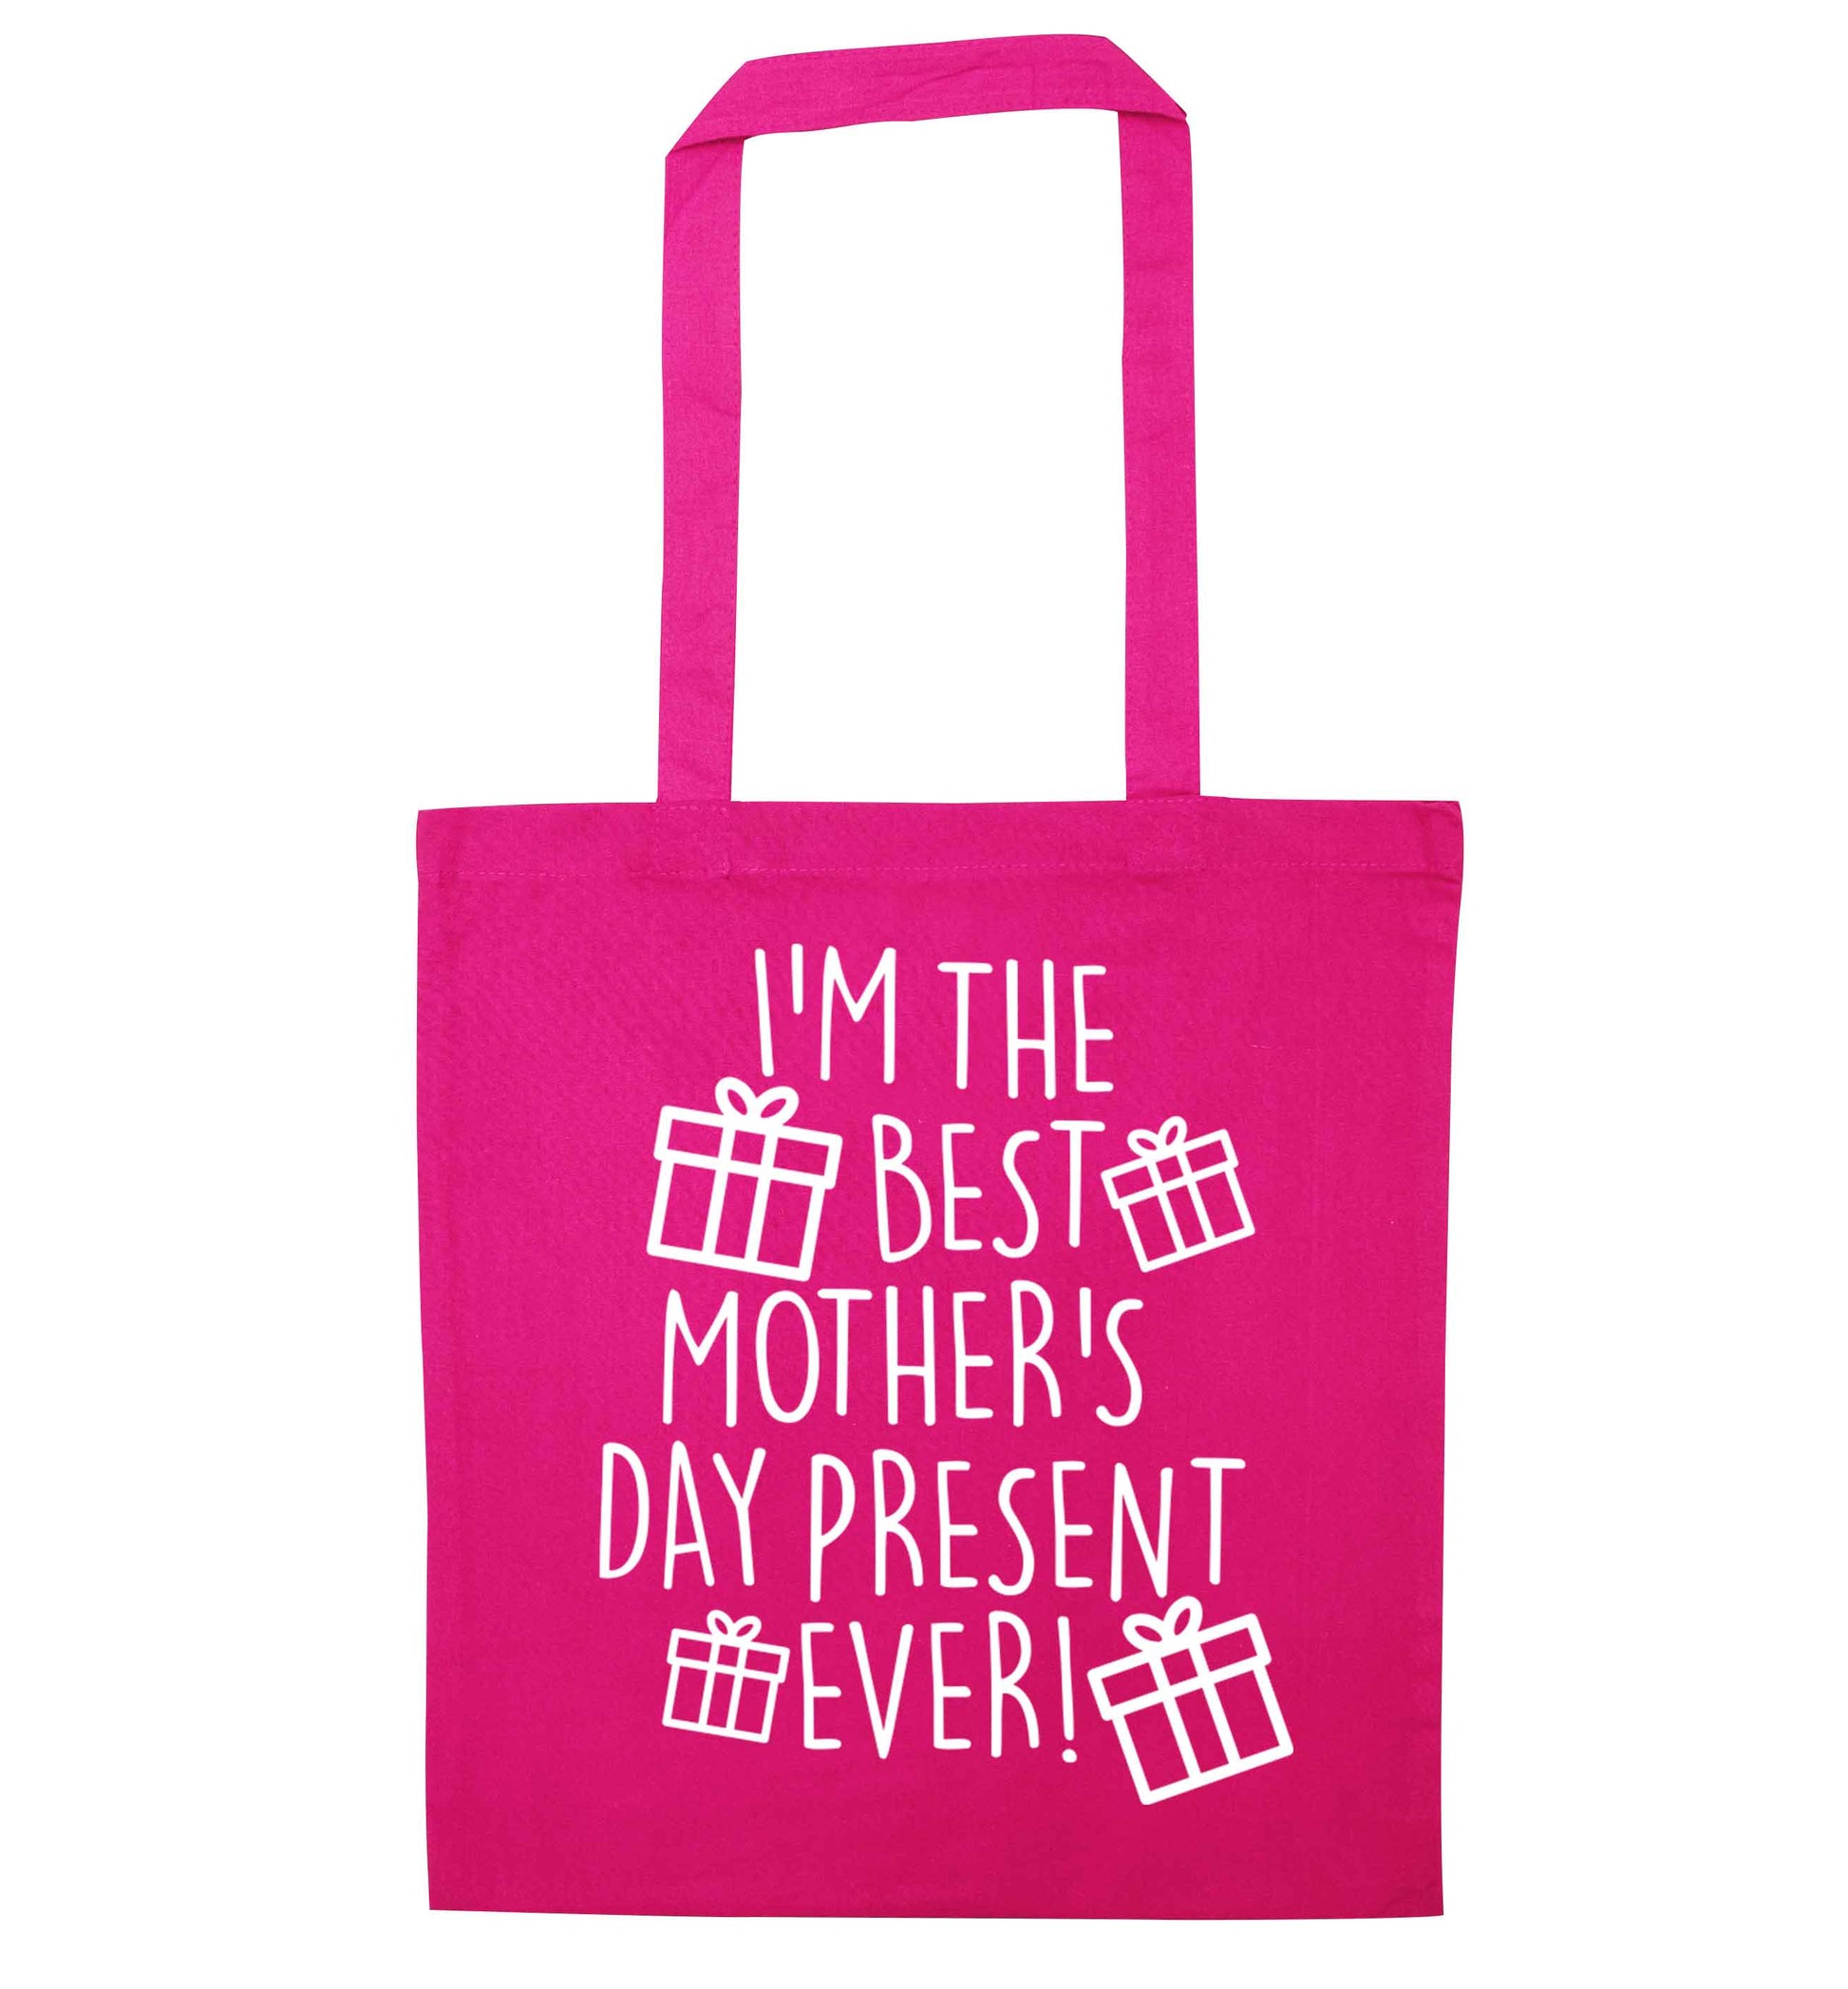 I'm the best mother's day present ever! pink tote bag